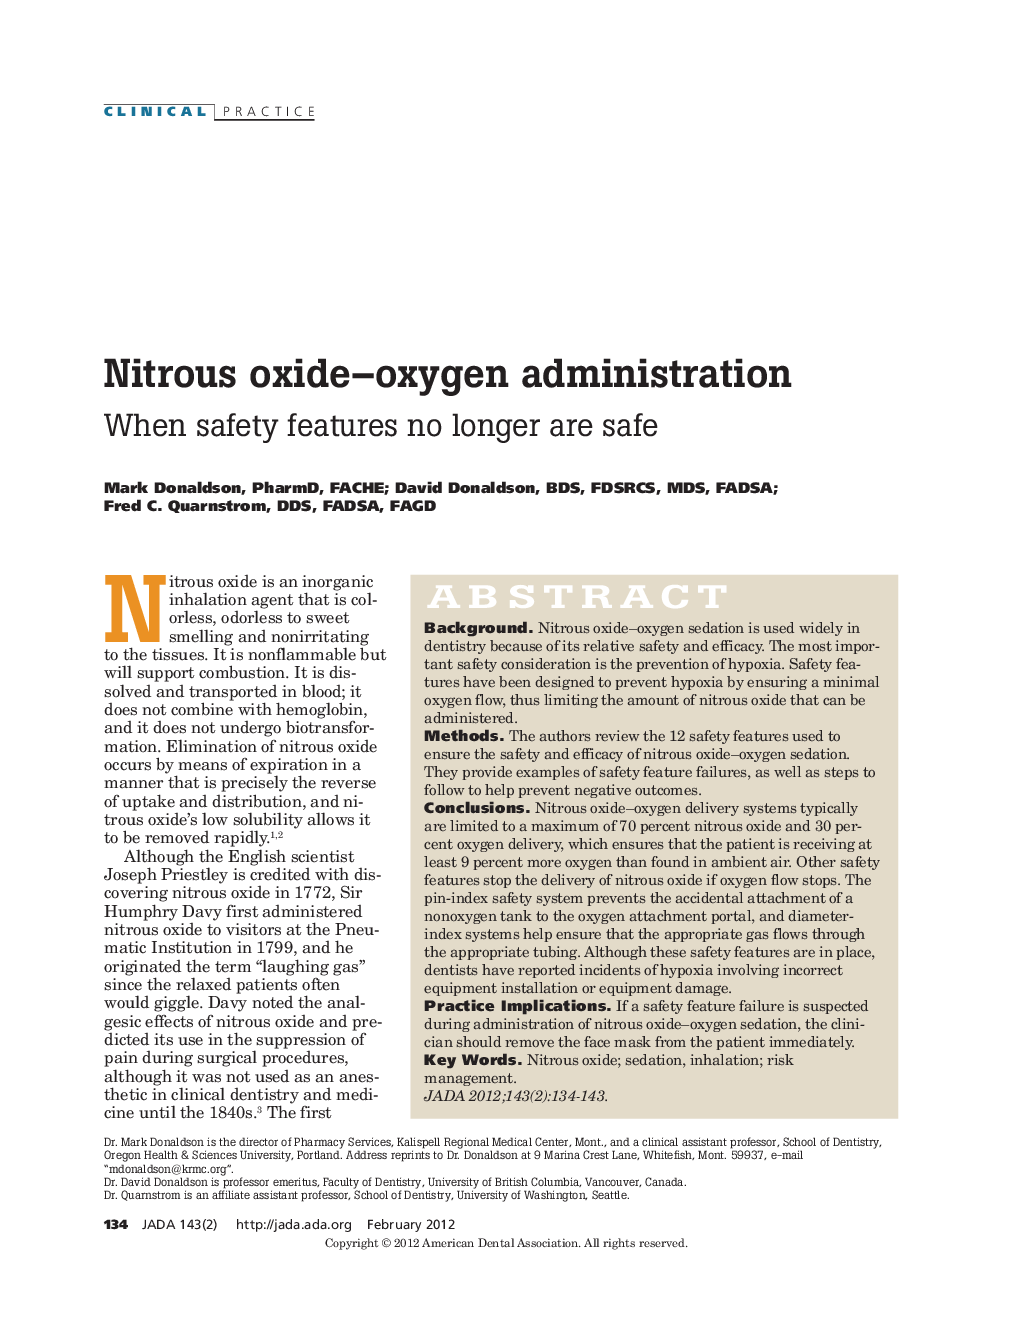 Nitrous oxide–oxygen administration : When safety features no longer are safe